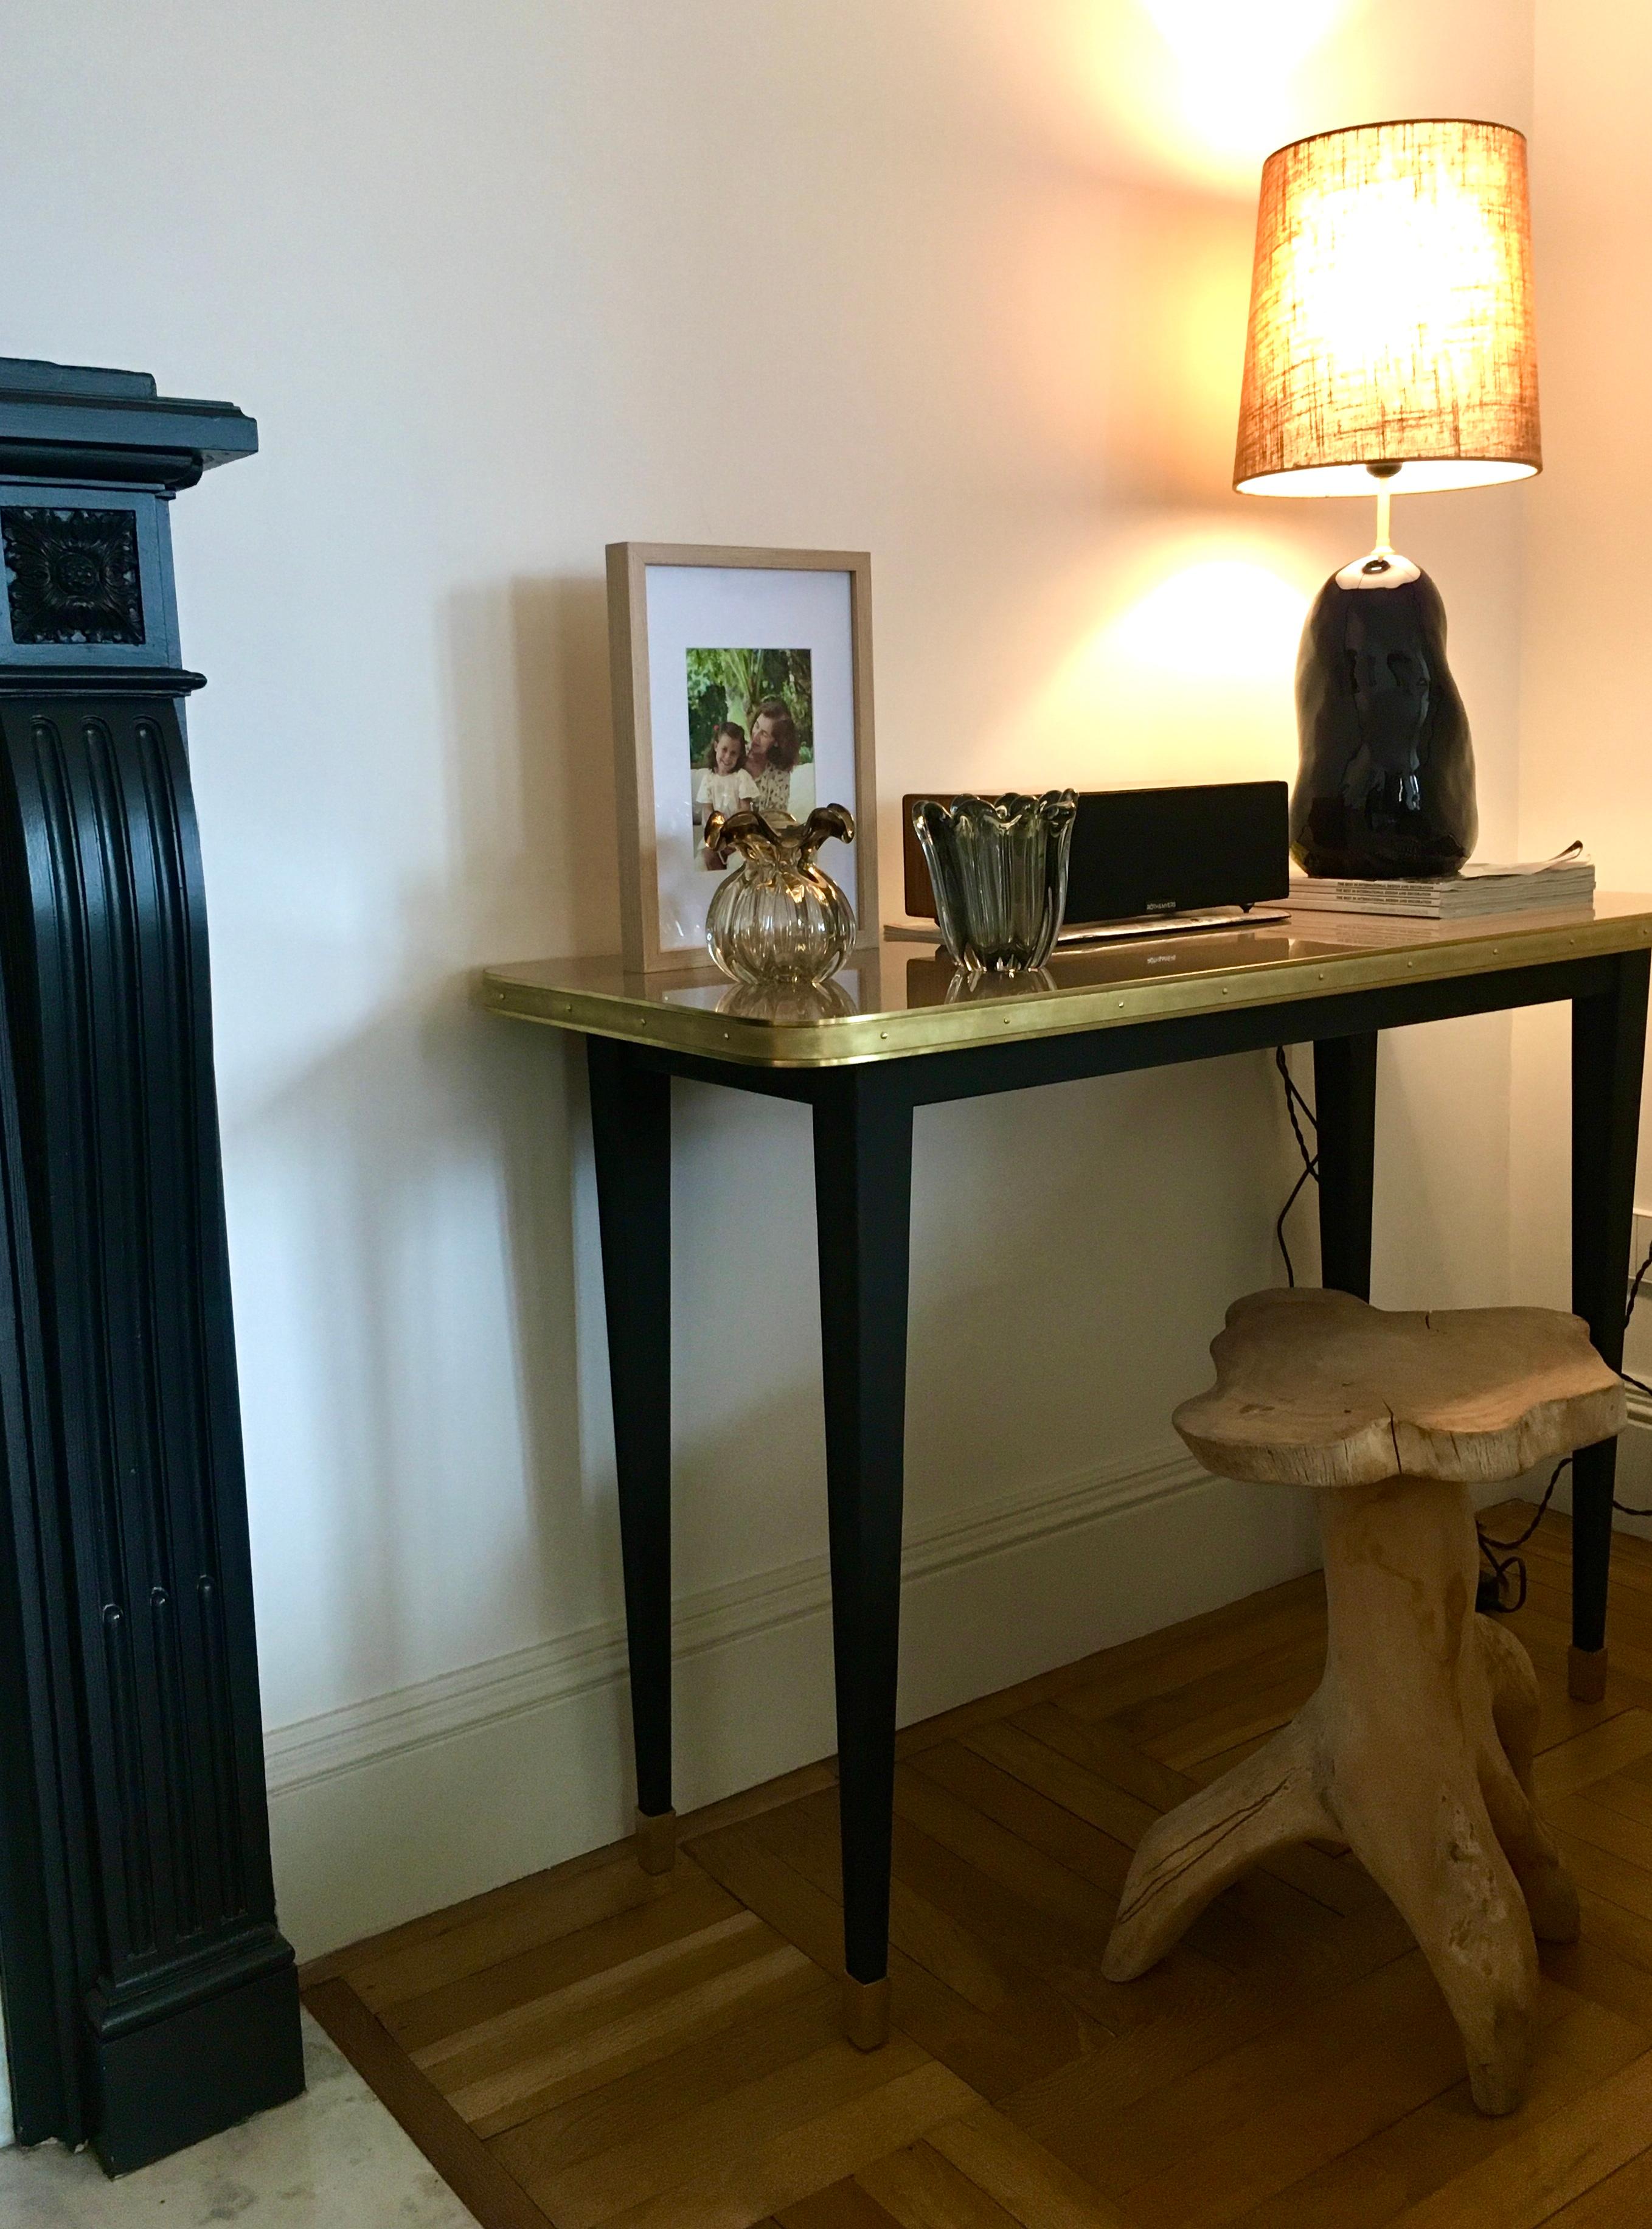 Spanish Console Table, High Gloss Laminate & Brass Details, Antique White - M For Sale